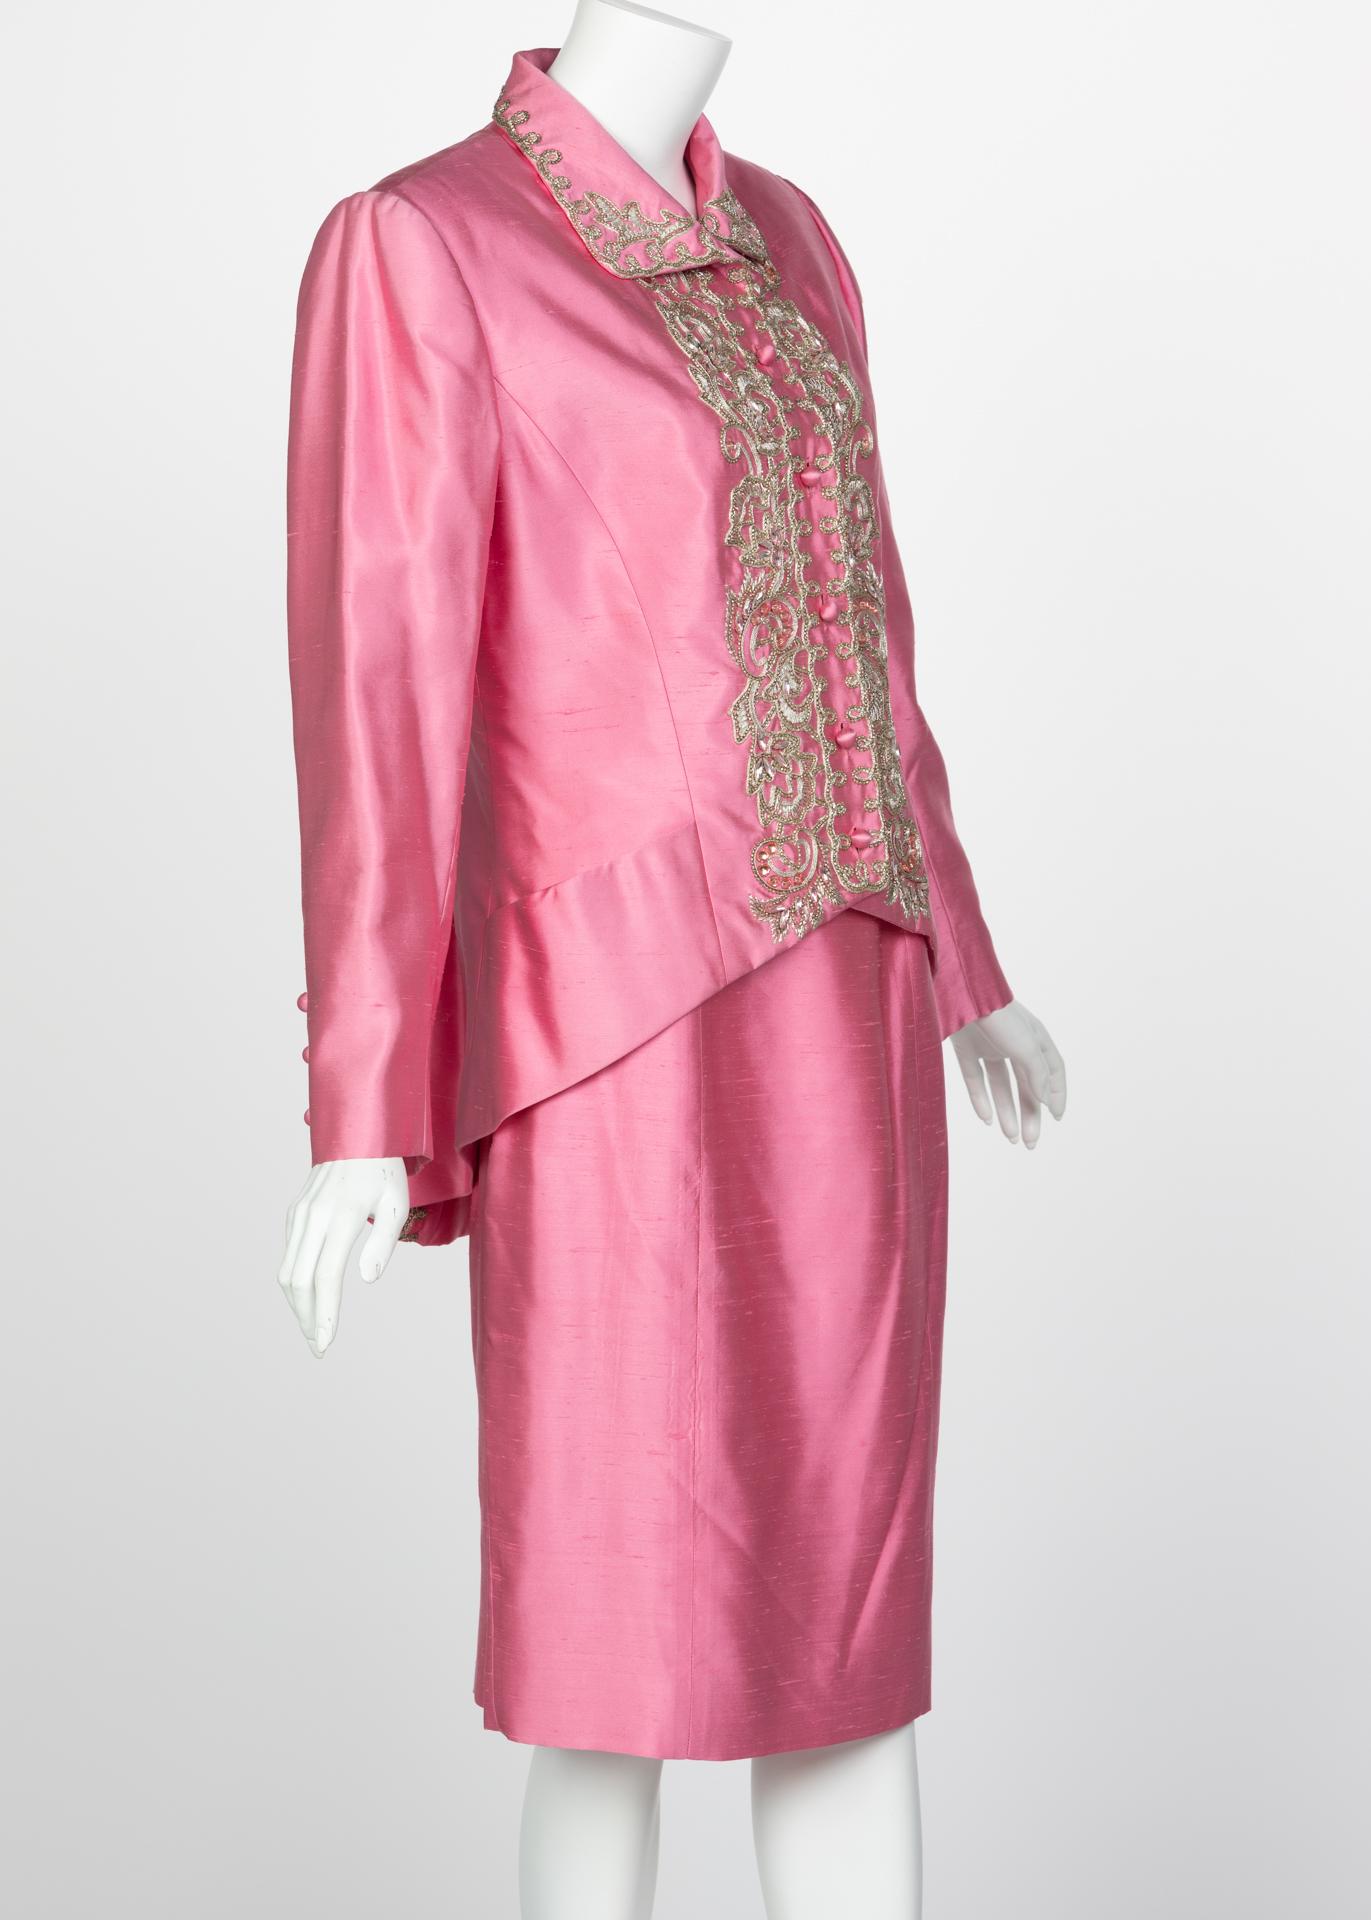 Vintage Chloé Pink Silk Shantung Embroidered Beaded Skirt Suit For Sale ...